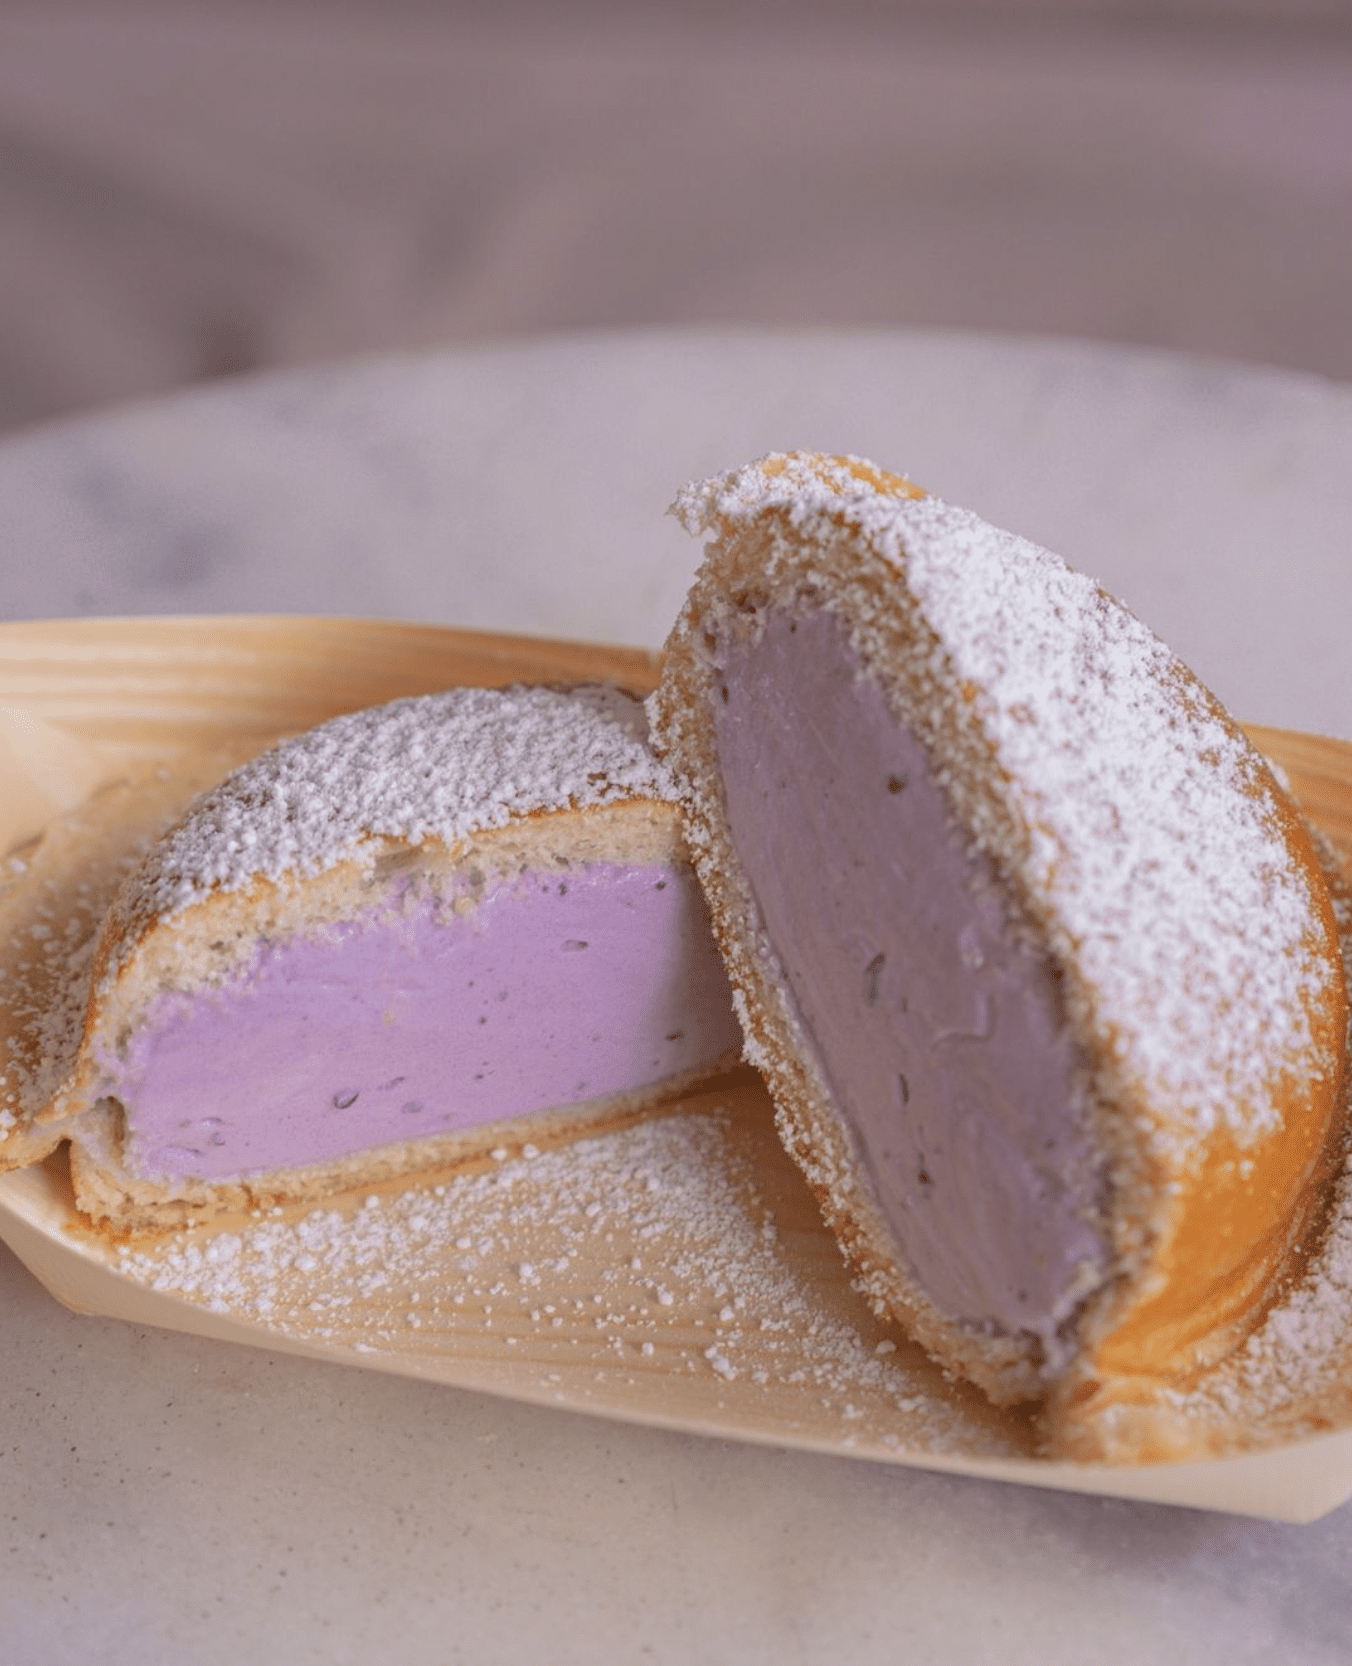 The best Asian cafes in London | Mamasons' renowned purple cube ice cream brioche